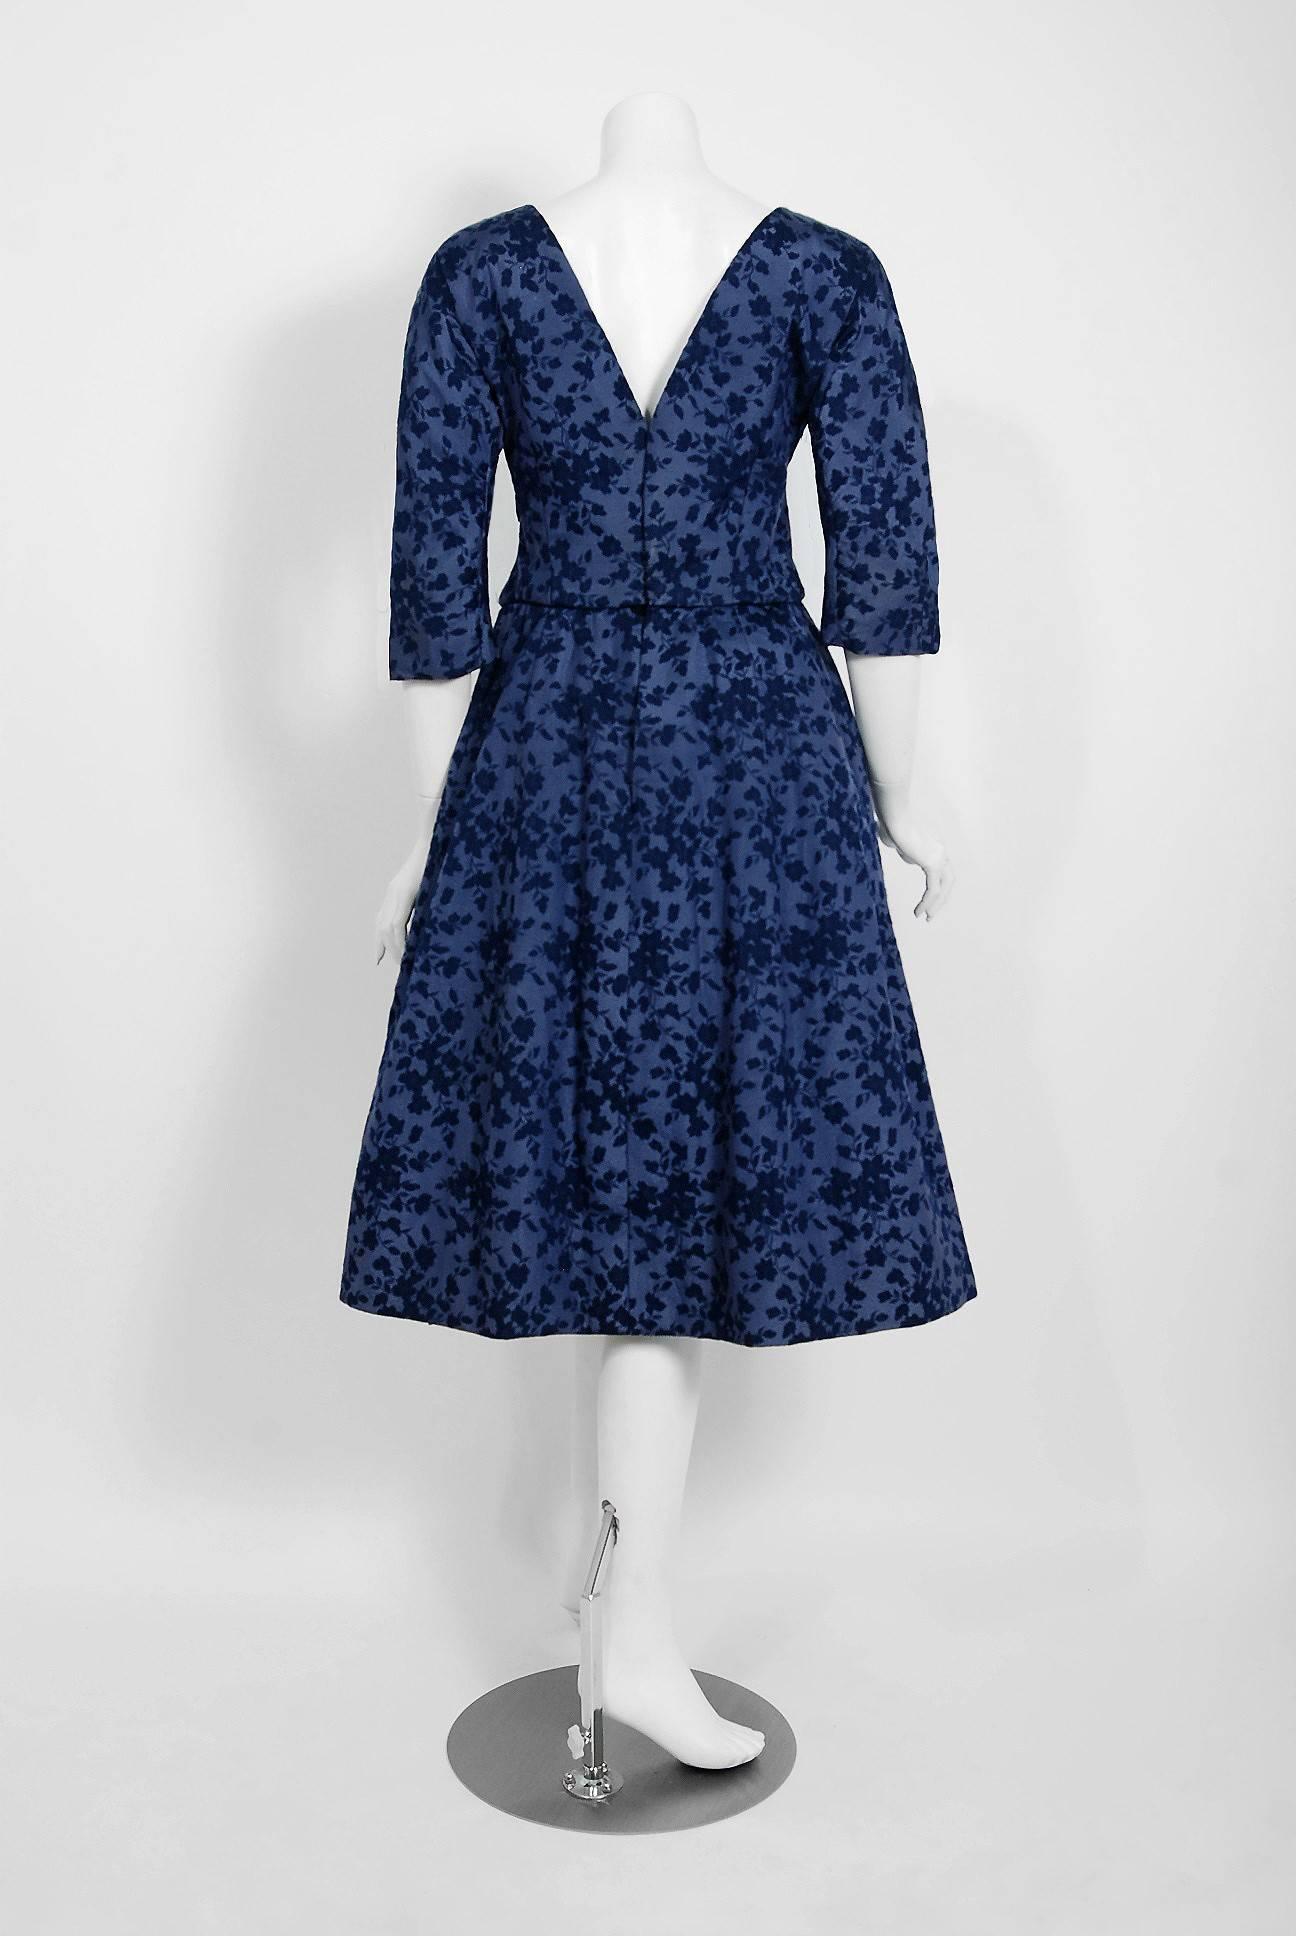 Vintage 1958 YSL for Christian Dior Demi-Couture Blue Floral Silk Full Dress 1